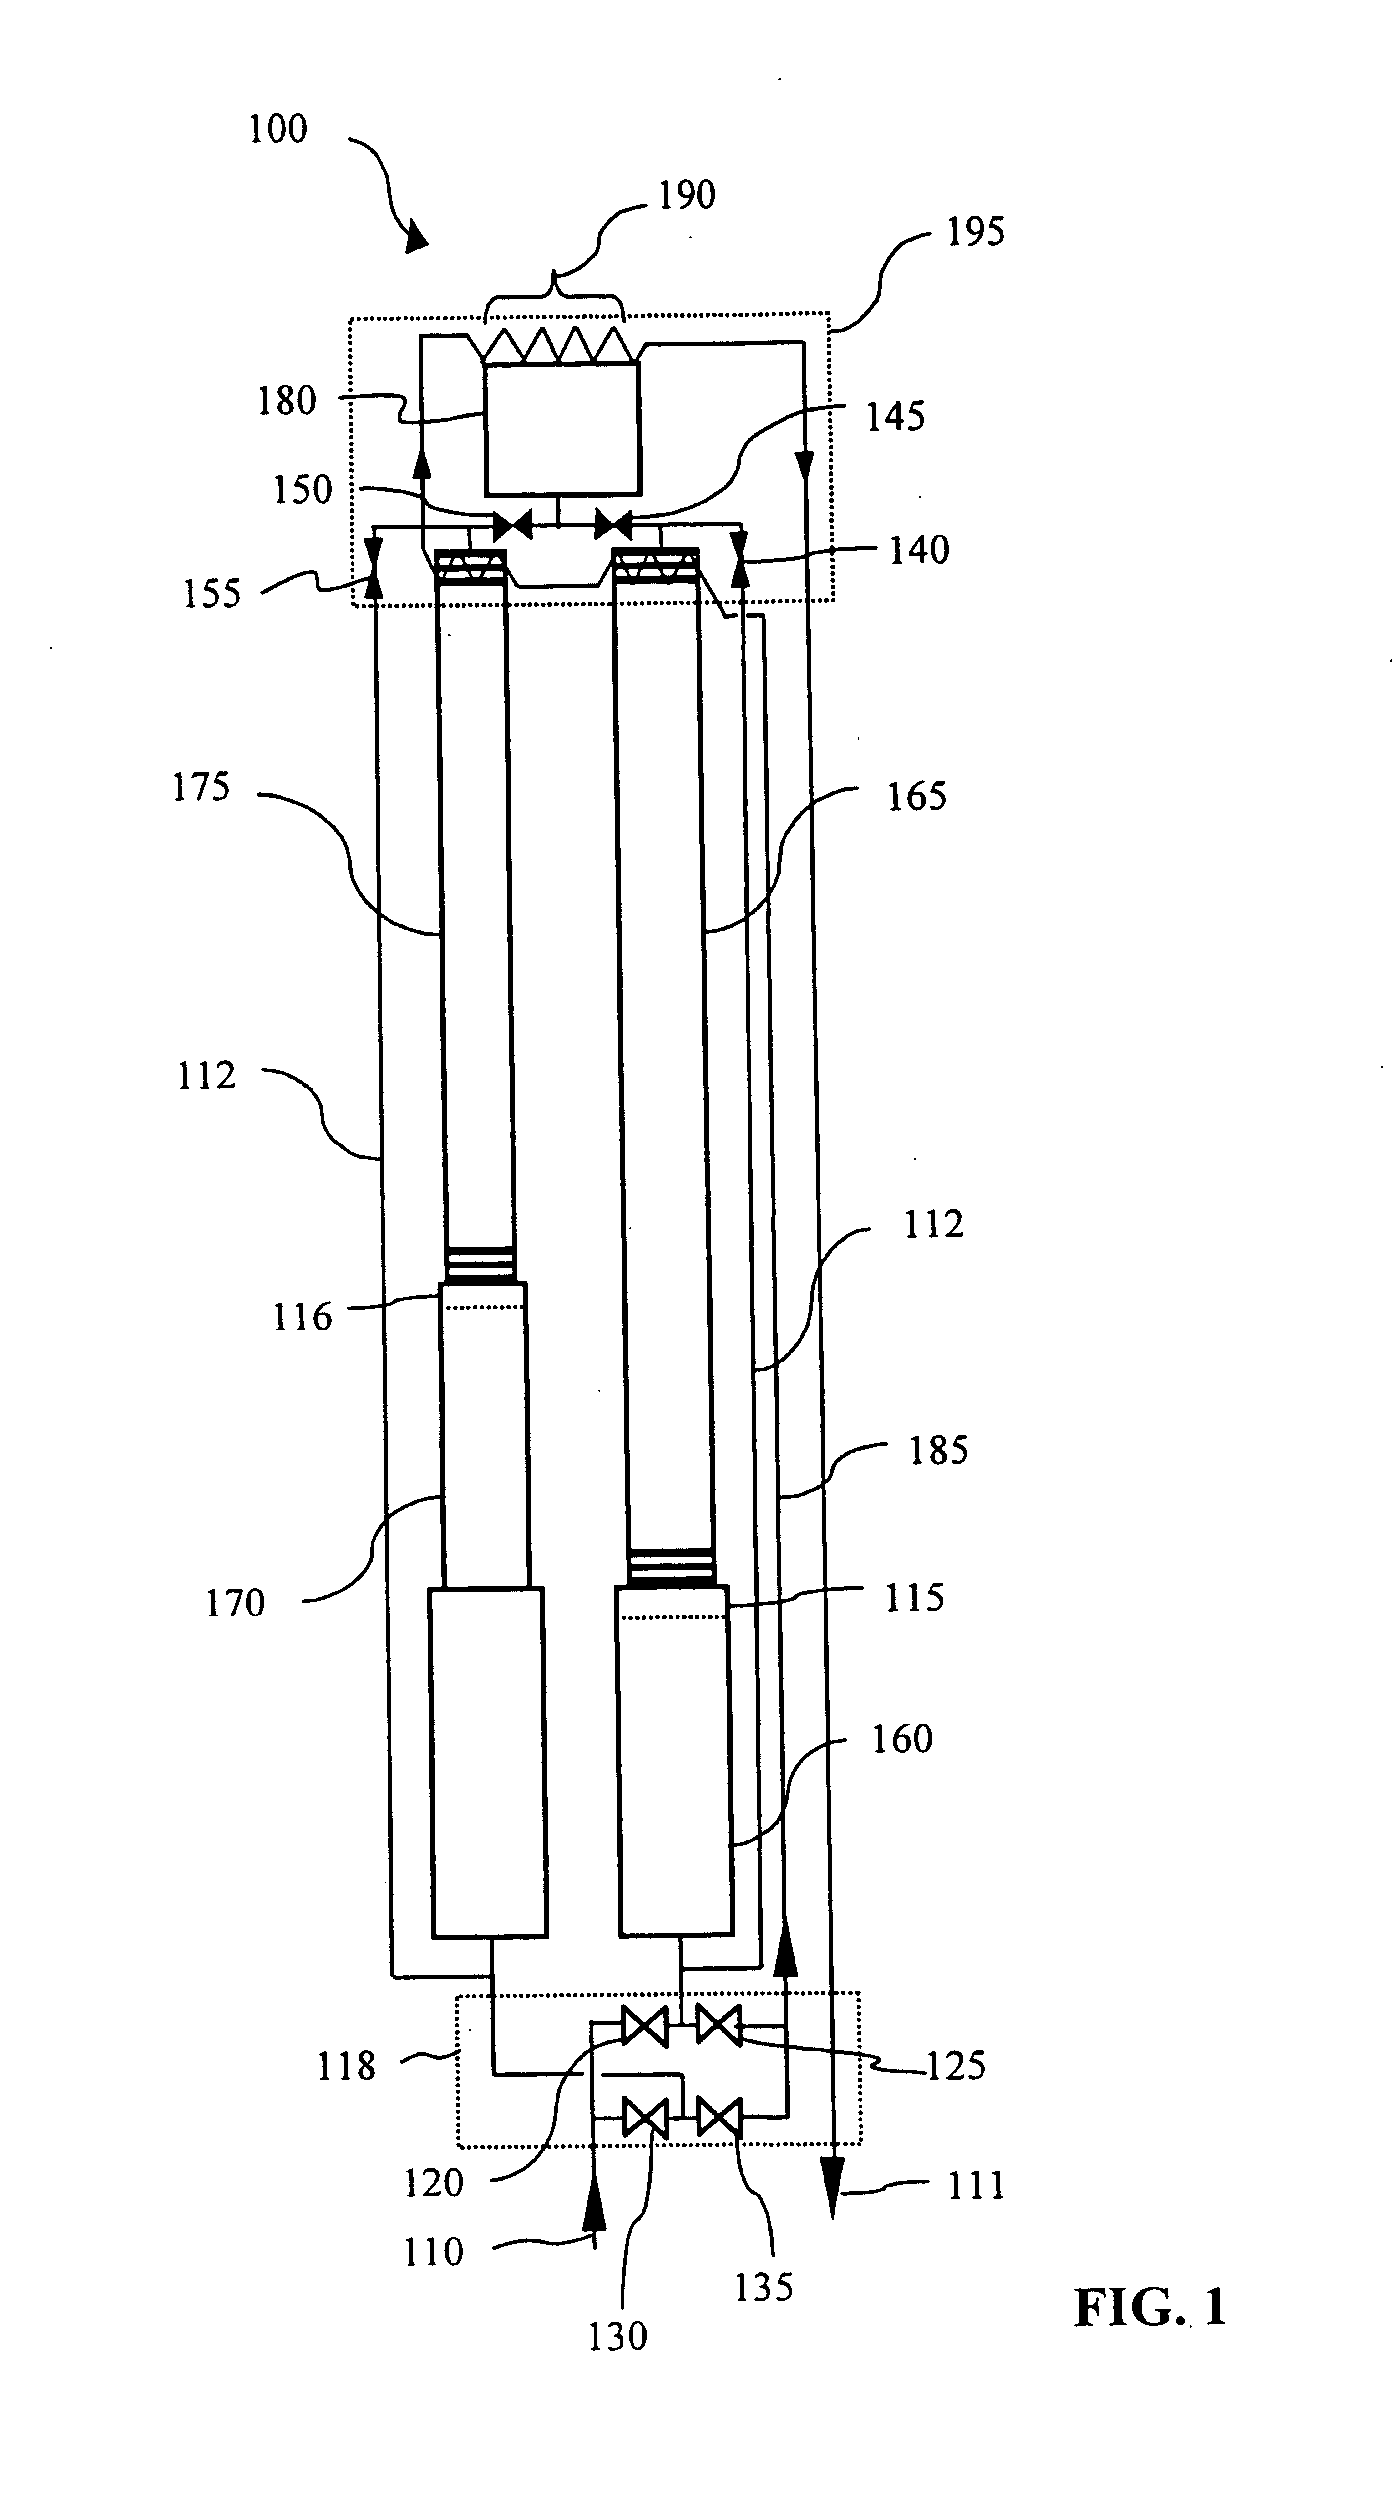 Cryopump with two-stage pulse tube refrigerator